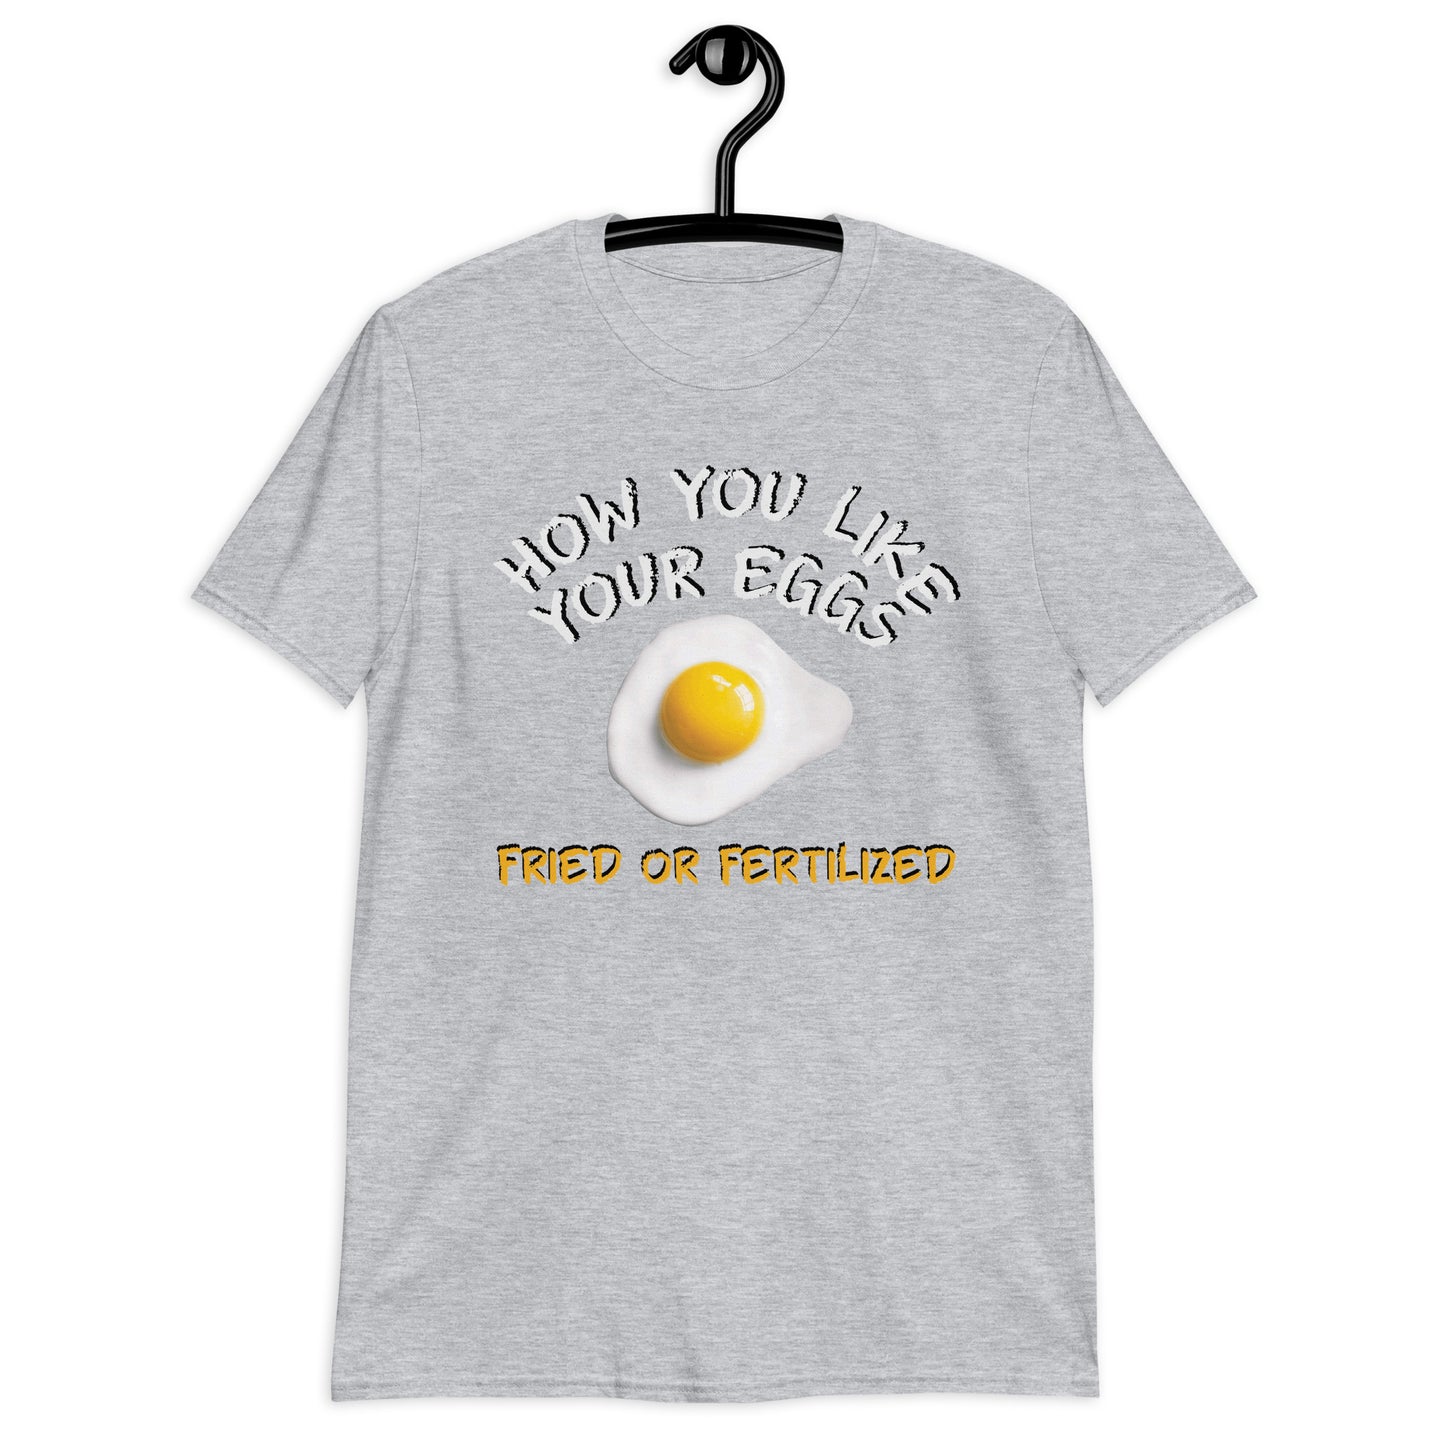 How you like your eggs T-Shirt